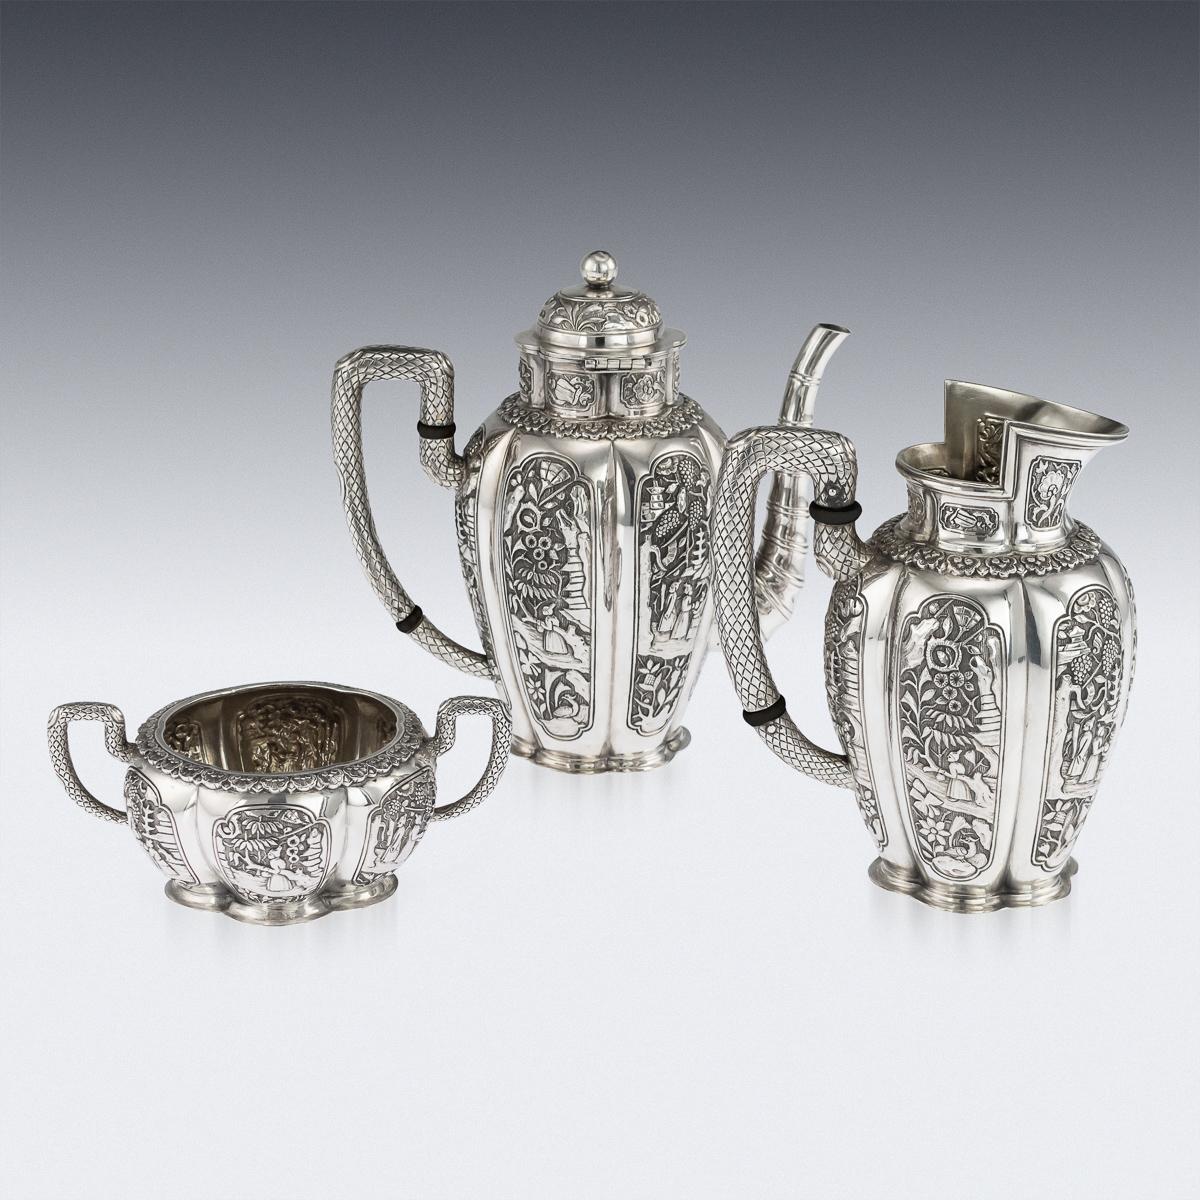 Antique late-19th century Austrian Chinoiserie solid silver three piece tea set, comprising of a teapot, sugar bowl and cream jug. Exceptionally hand crafted, of melon shape, repousse and finely chased work, depicting people of nobility surrounded